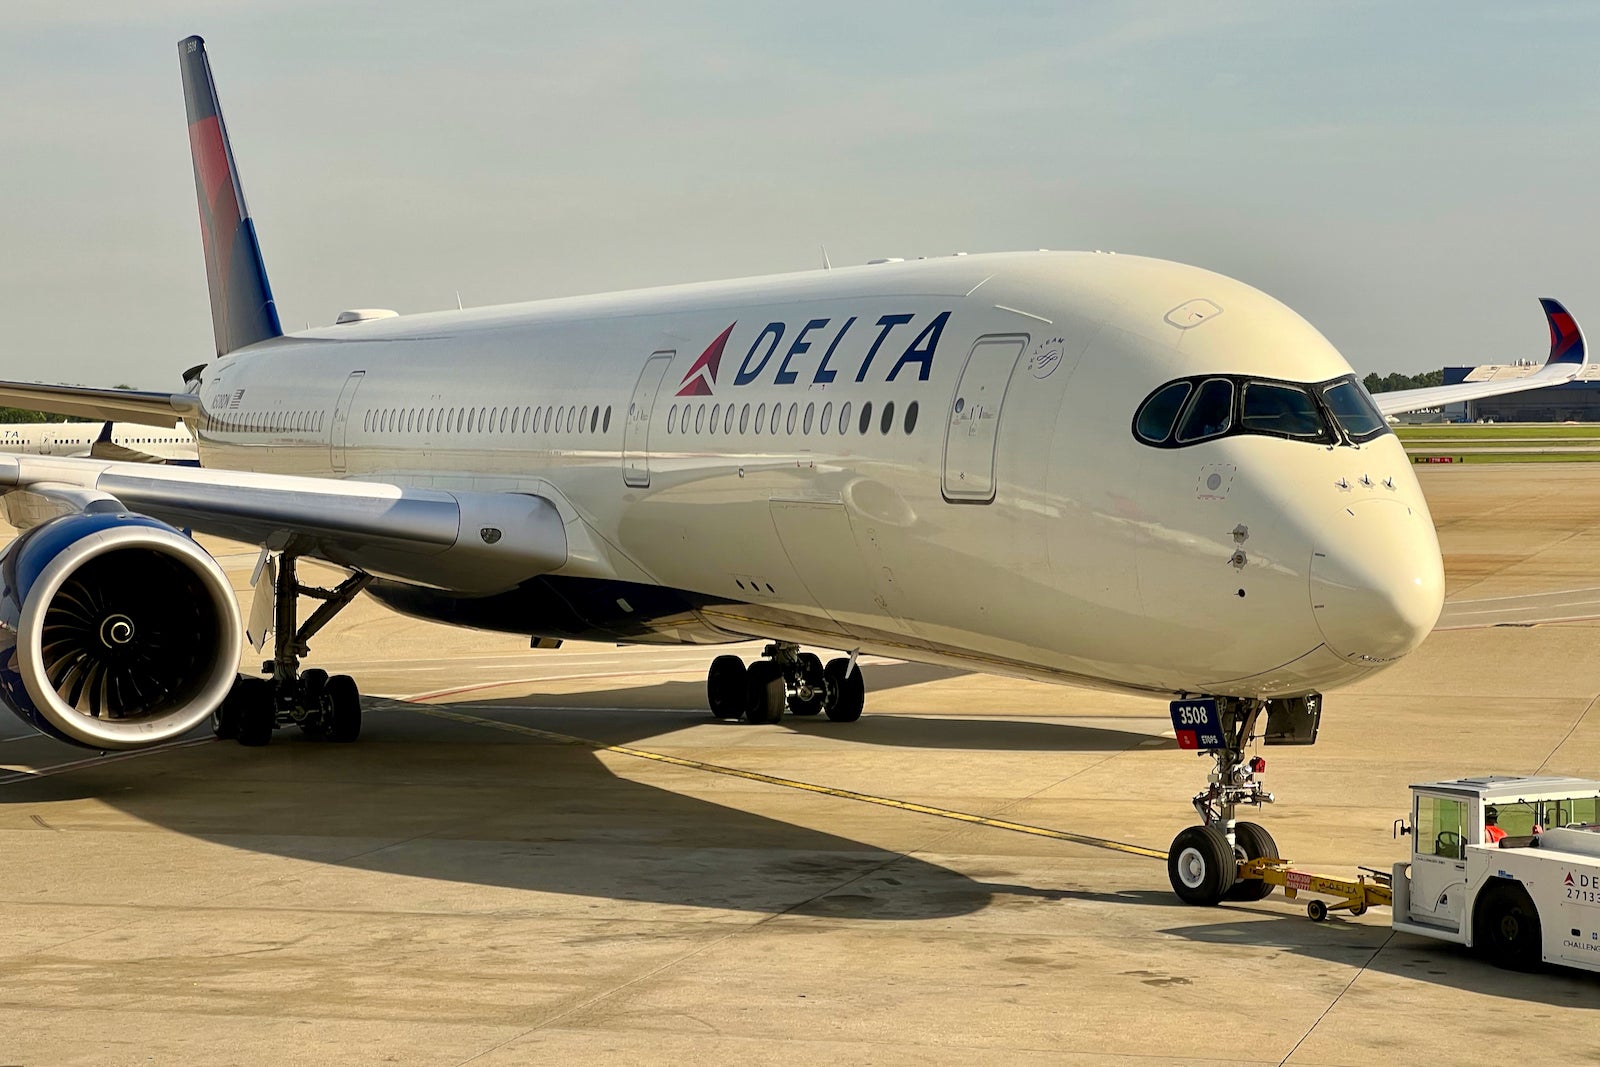 Delta baggage fees and how to avoid paying them - The Points Guy